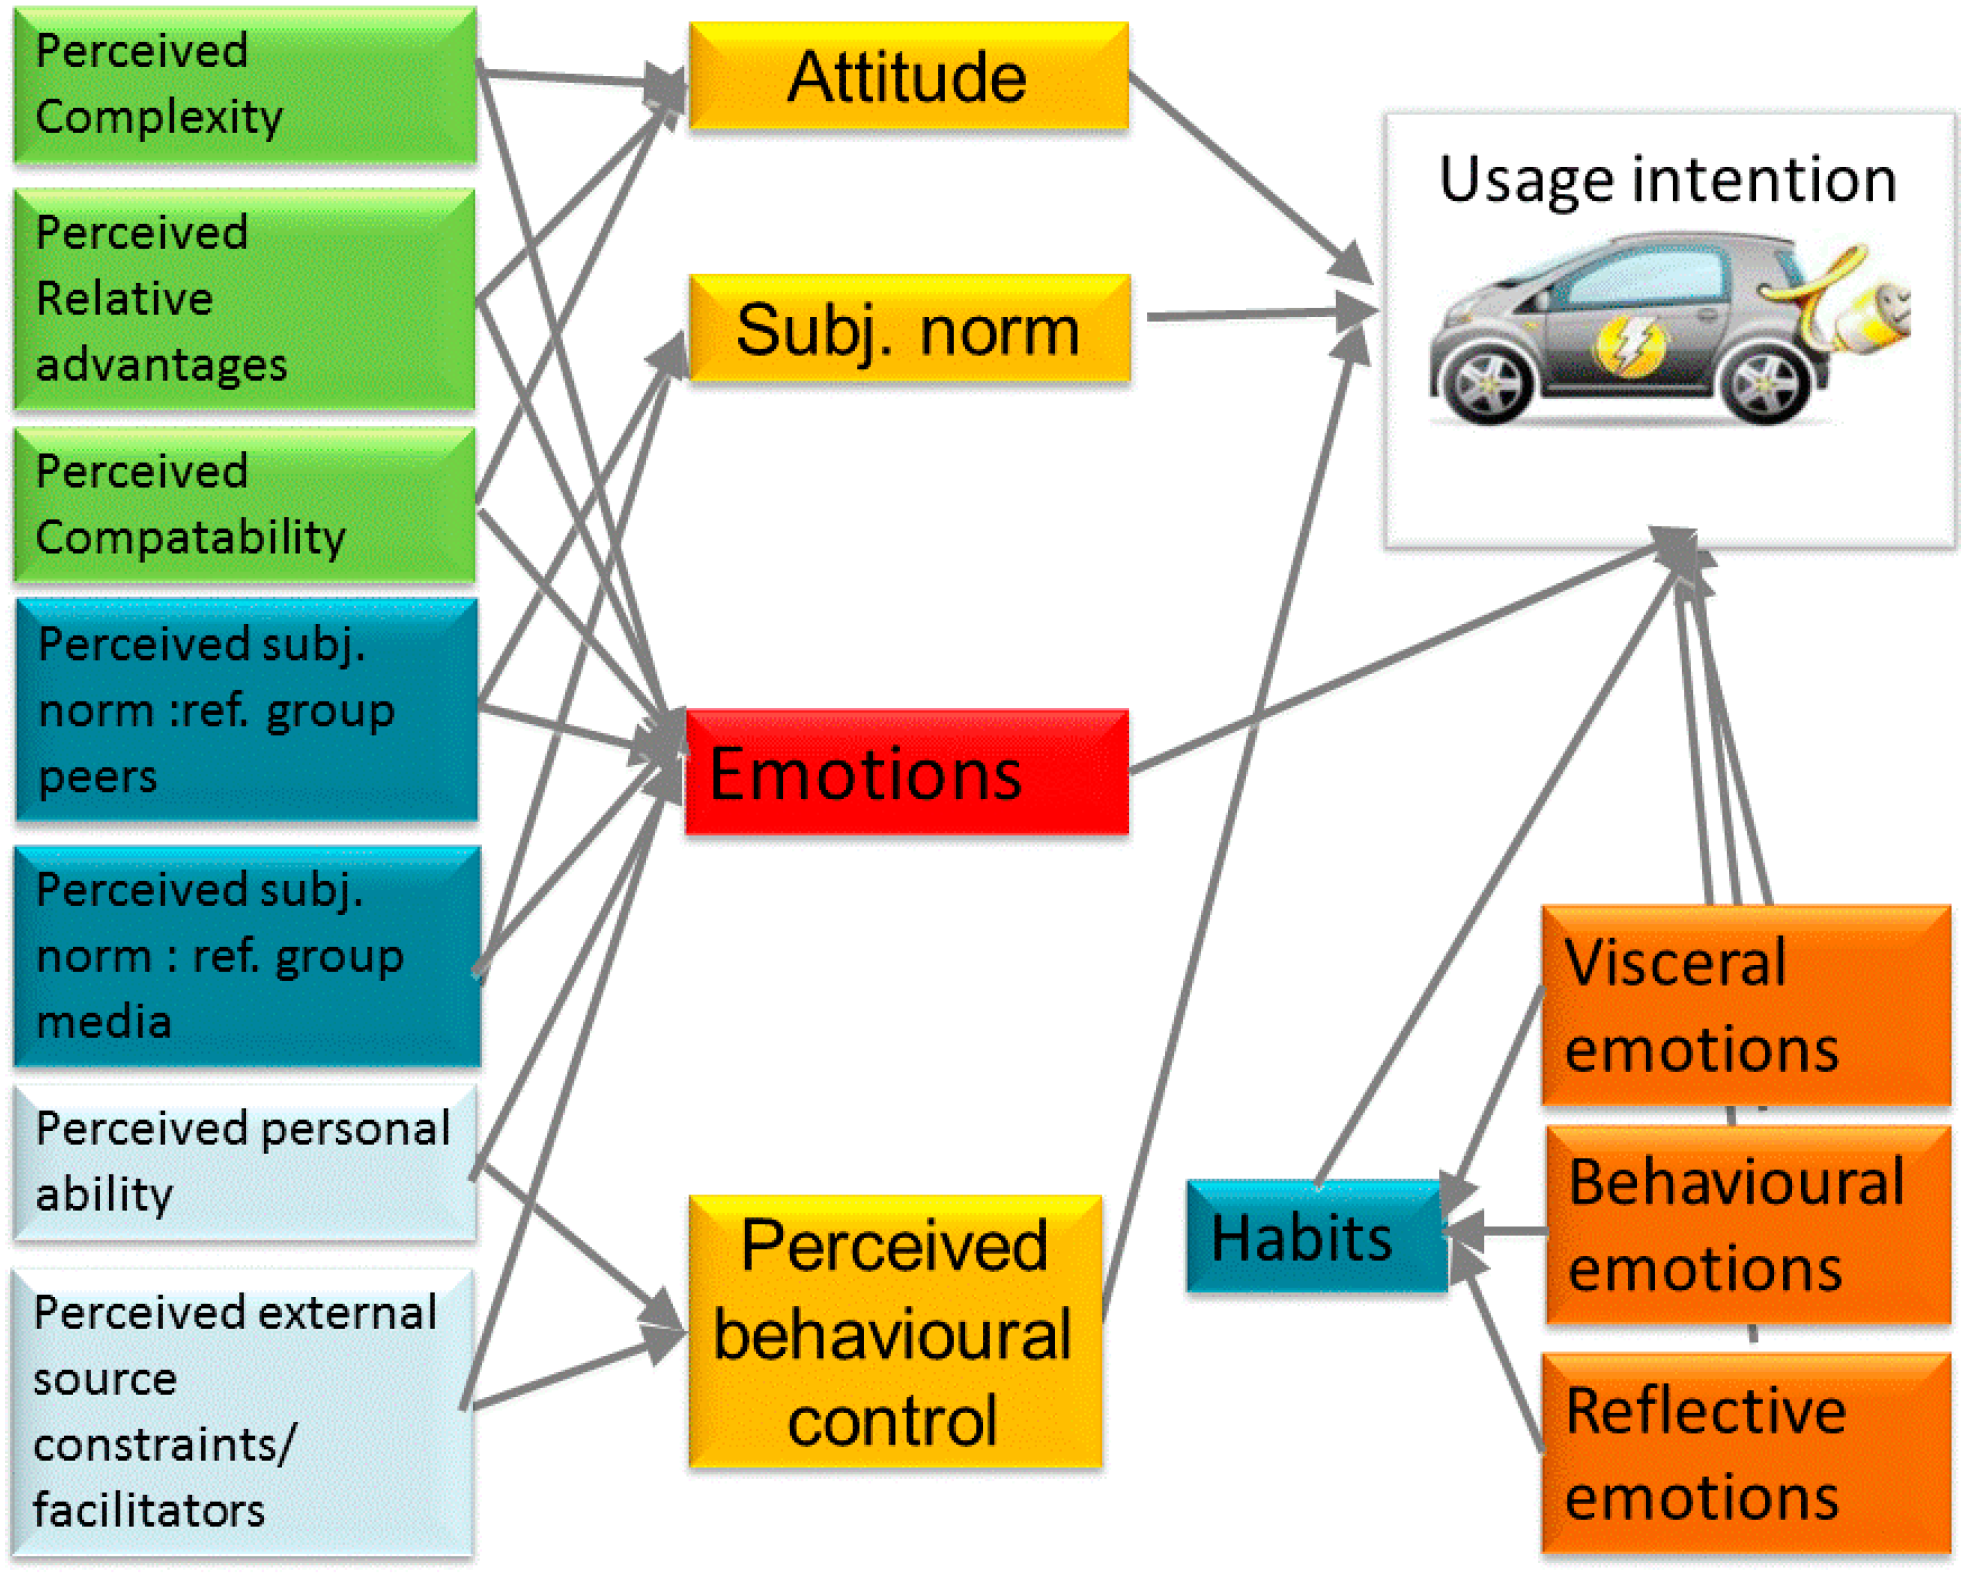 research paper on consumer behaviour towards electric vehicles